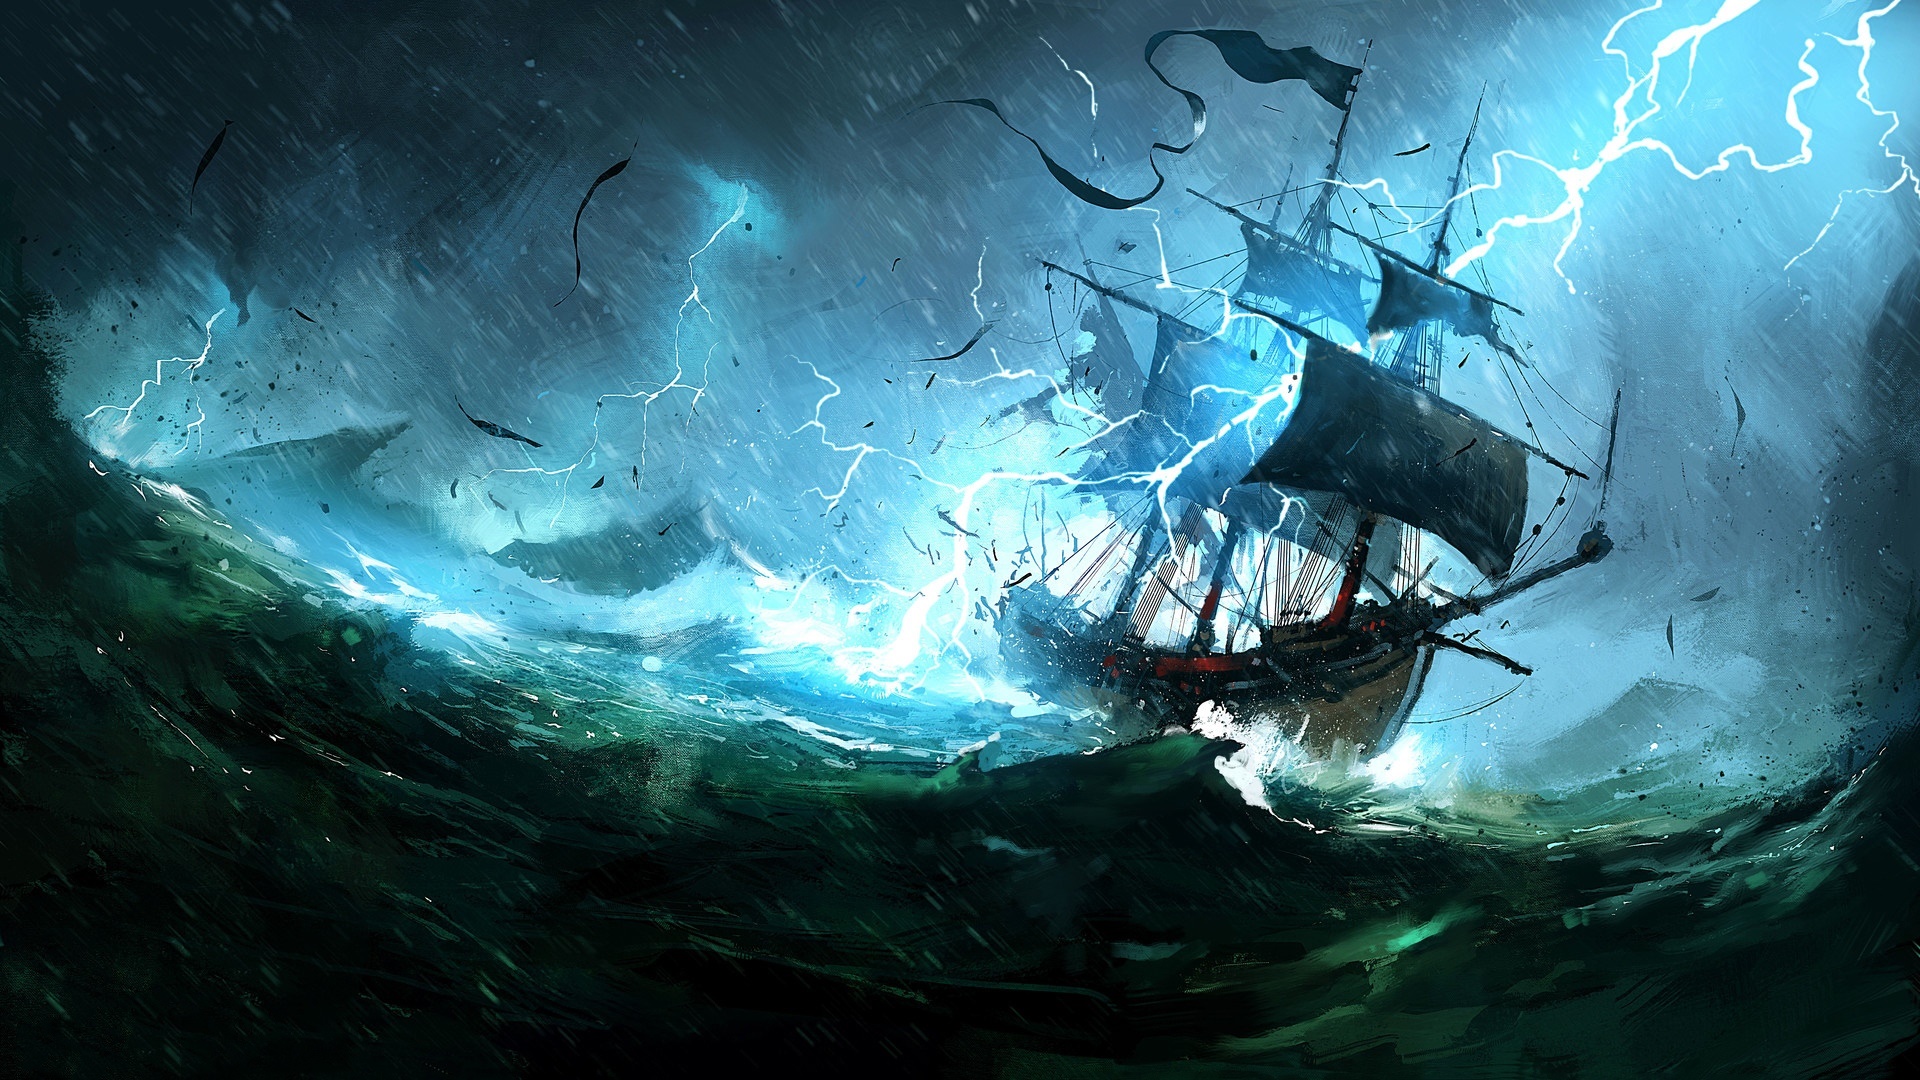 Pirate ship in a storm x wallpaper